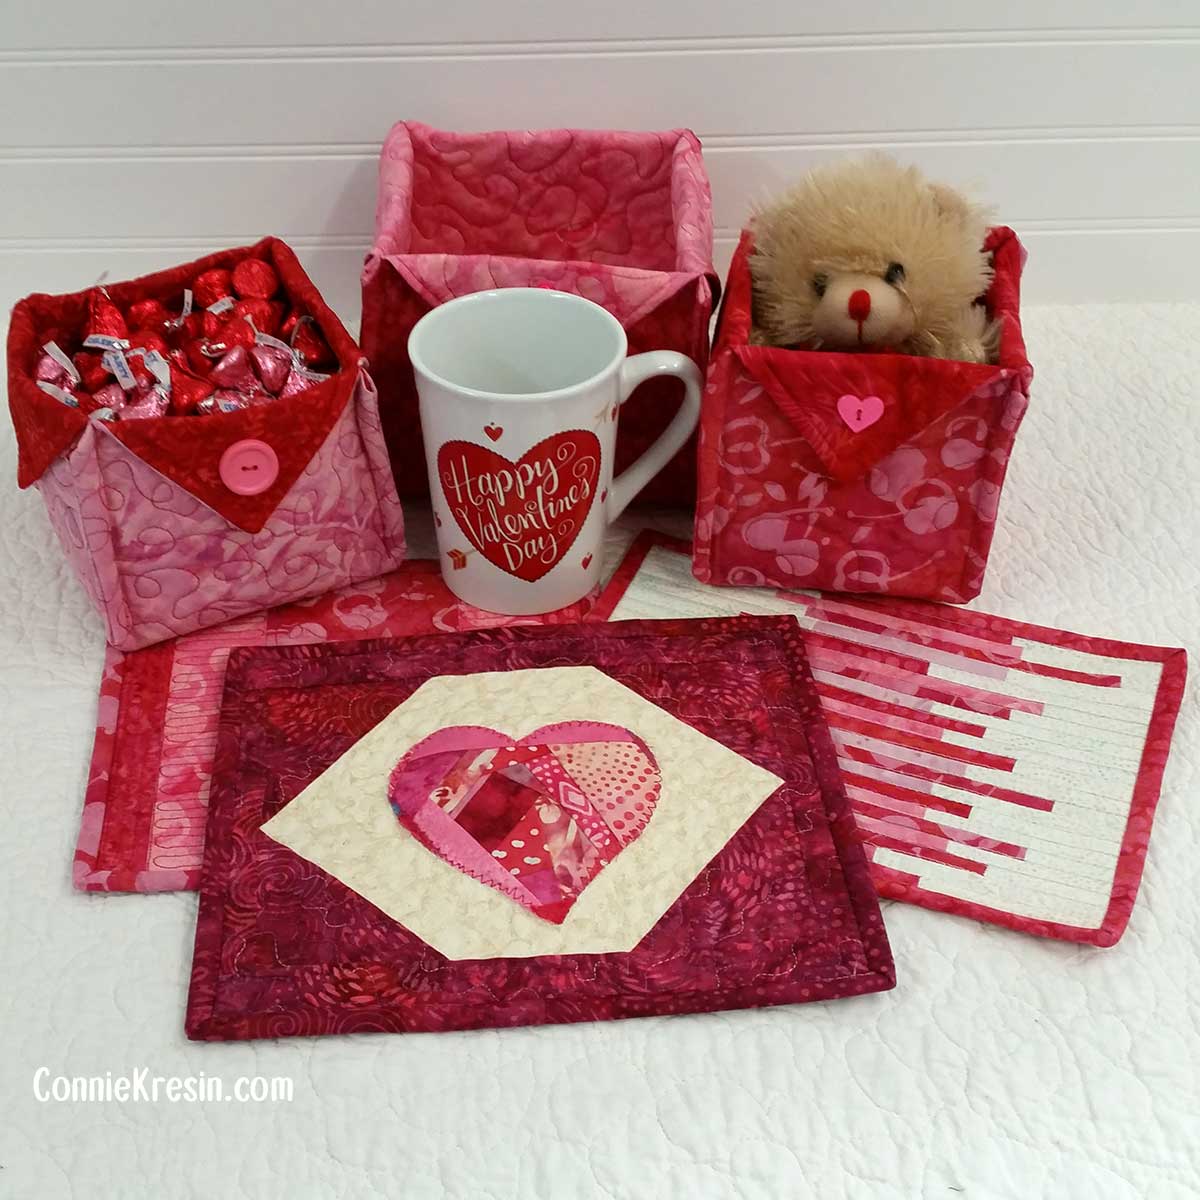 Happy Galentine’s Day Mug Rug Tutorial and more Fabric Baskets!